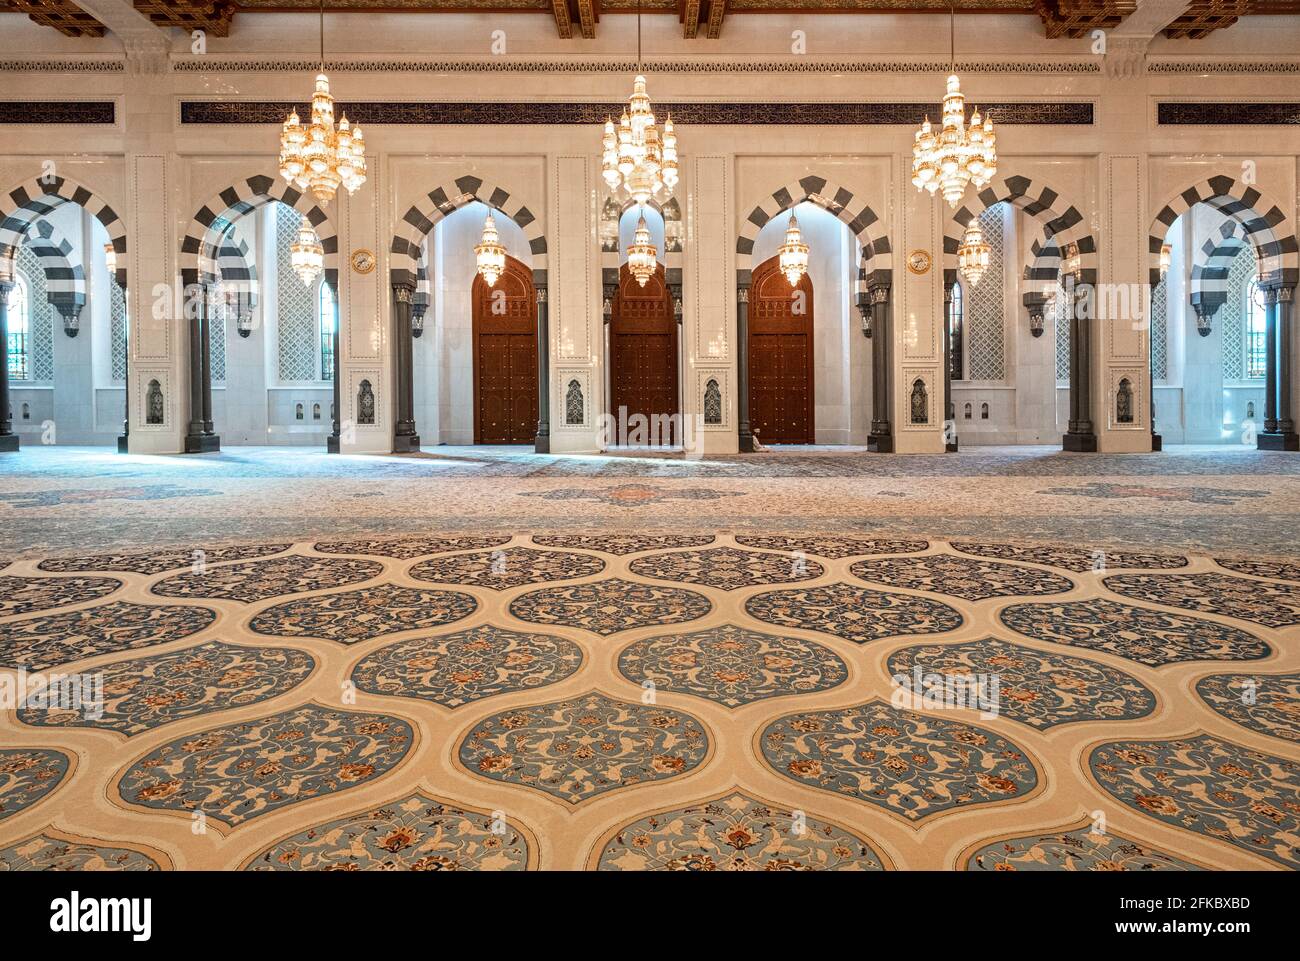 Male praying room of the Sultan Qaboos Mosque with decorated carpet and many arches, Muscat, Oman, Middle East Stock Photo